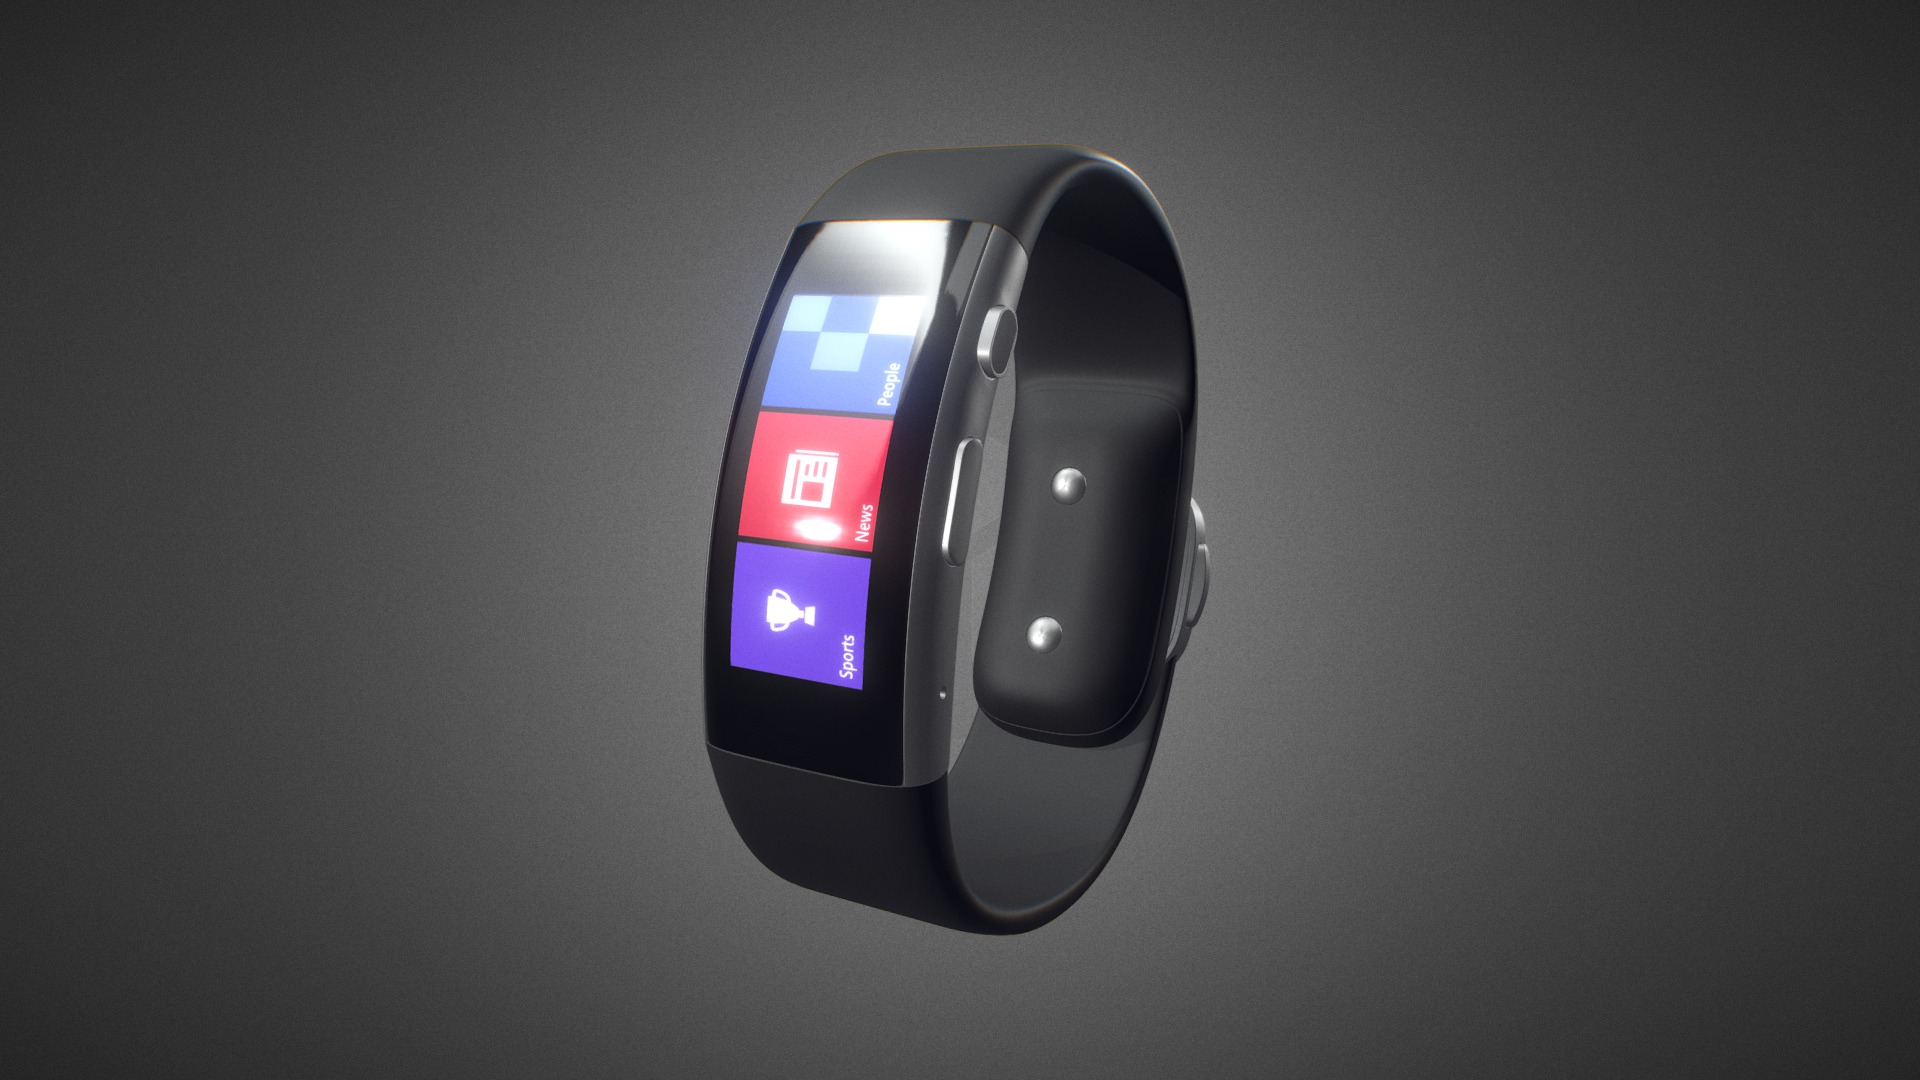 3D model Microsoft Band 2 for Element 3D - This is a 3D model of the Microsoft Band 2 for Element 3D. The 3D model is about a black and silver computer mouse.